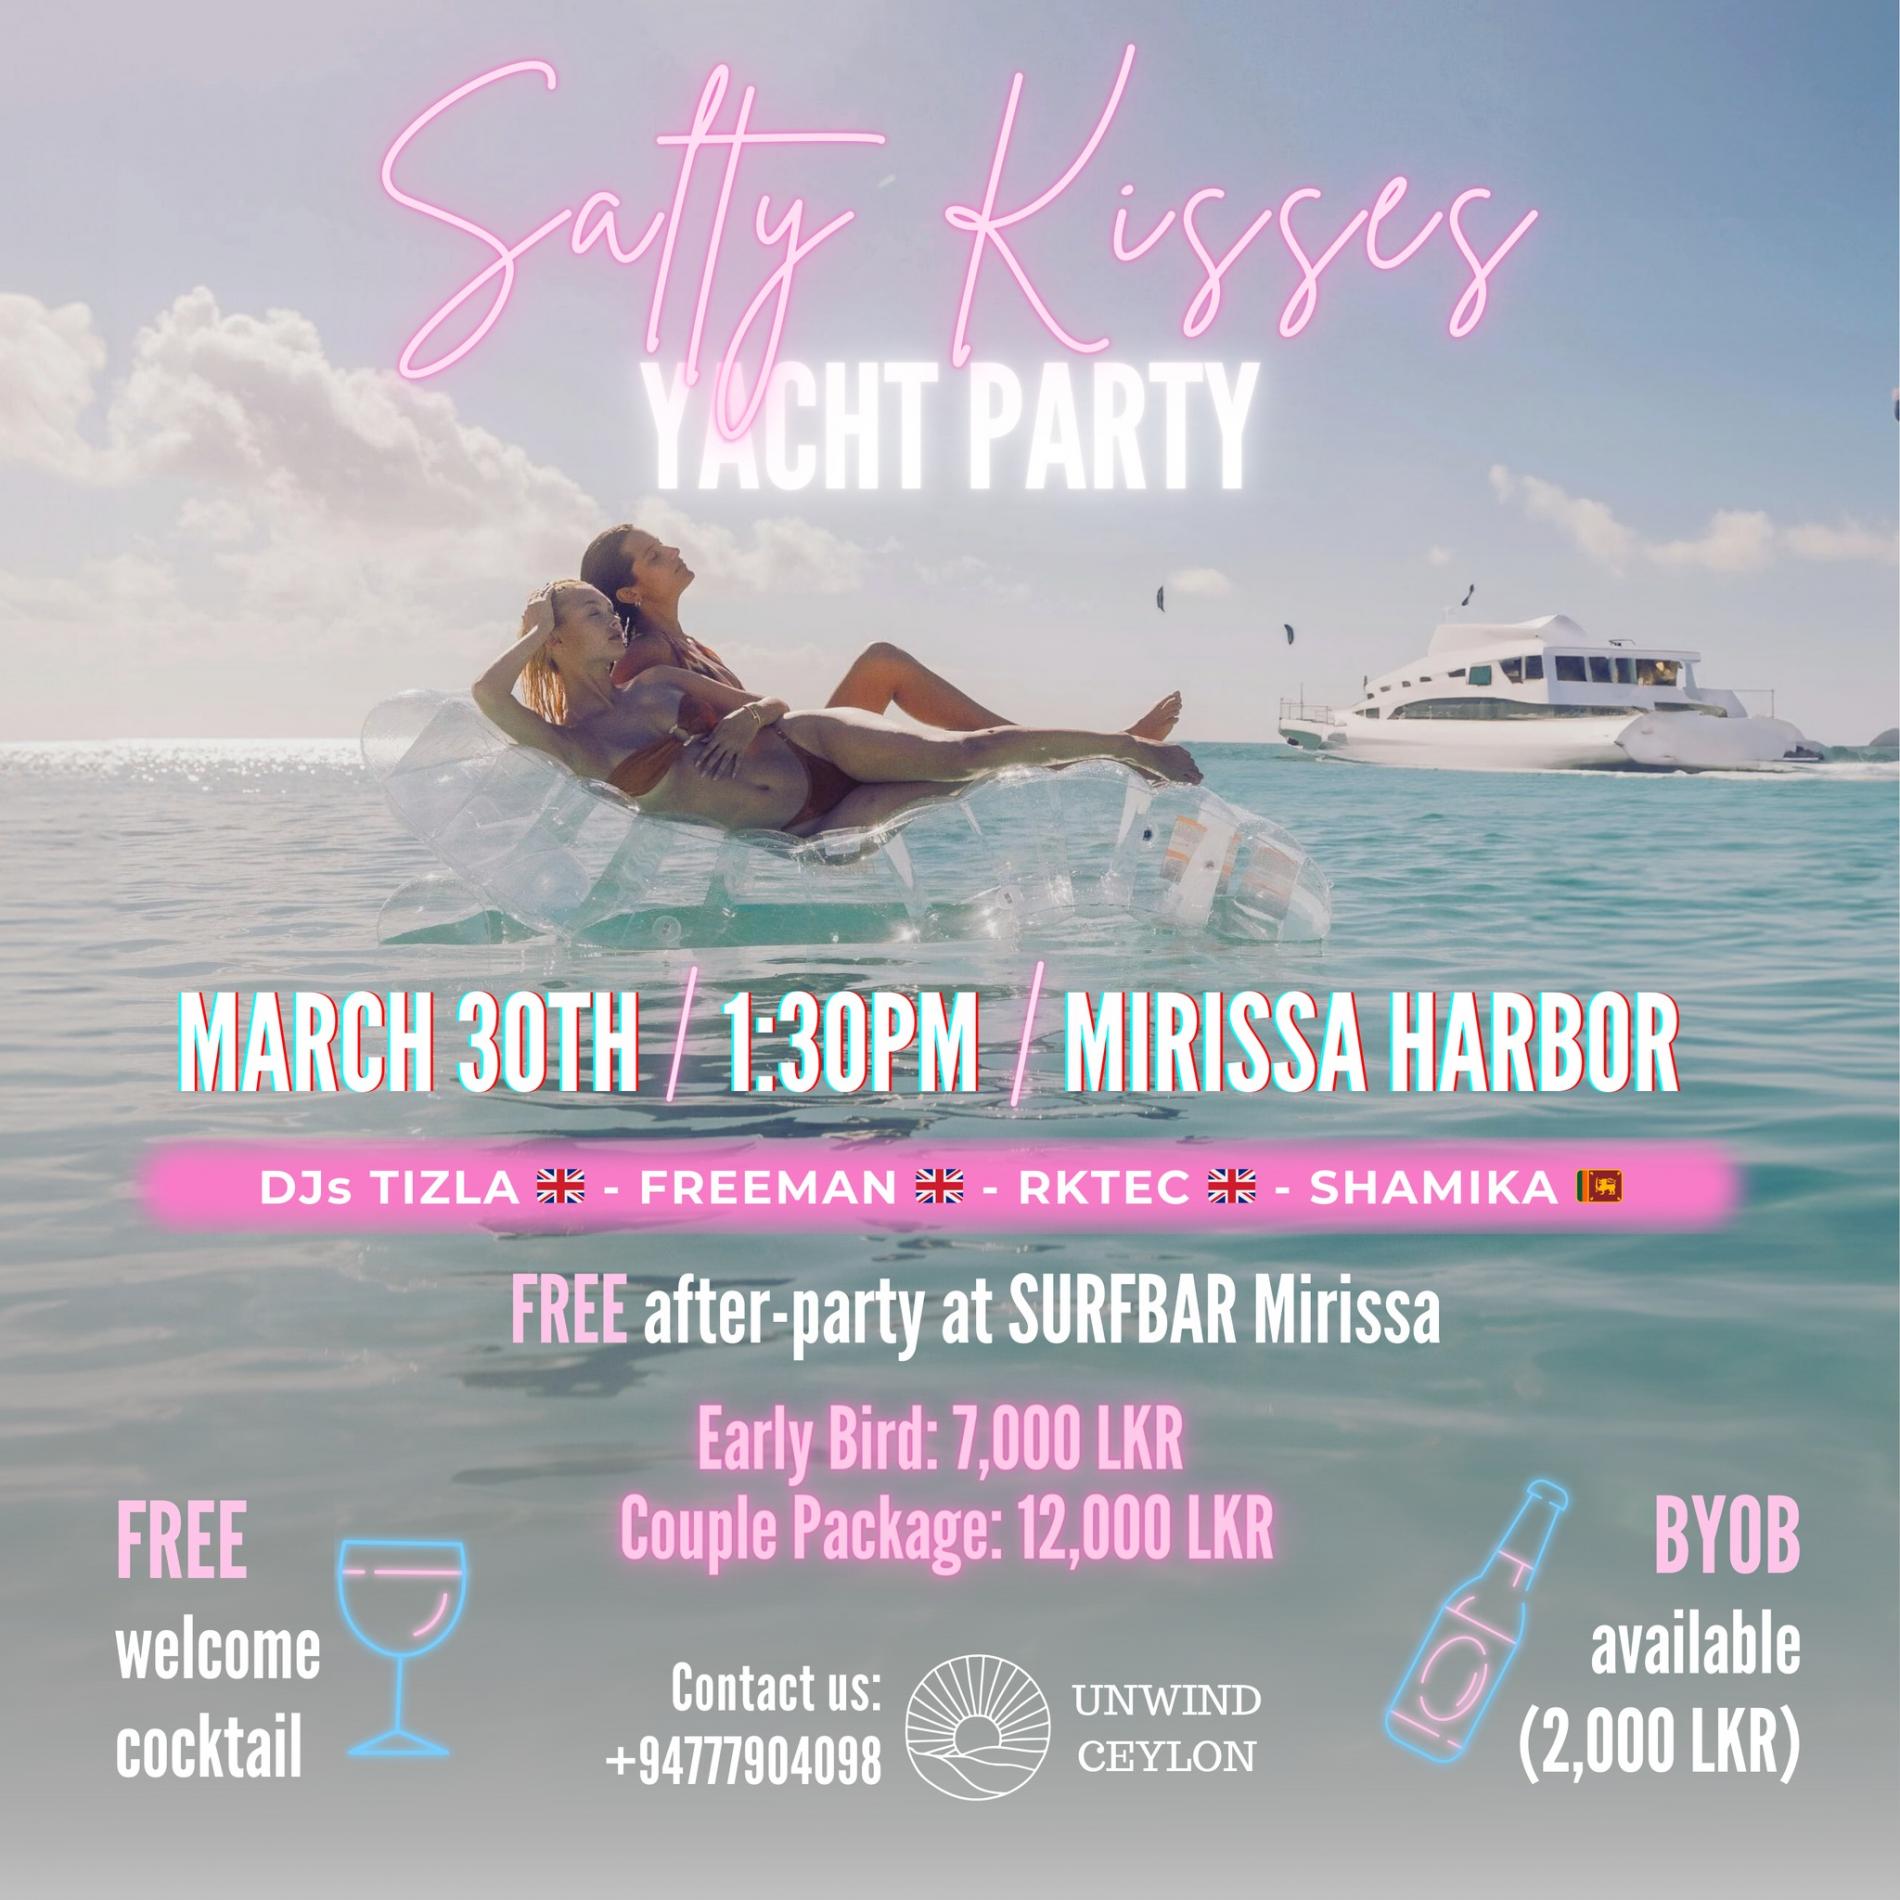 Salty Kisses (Yacht Party)